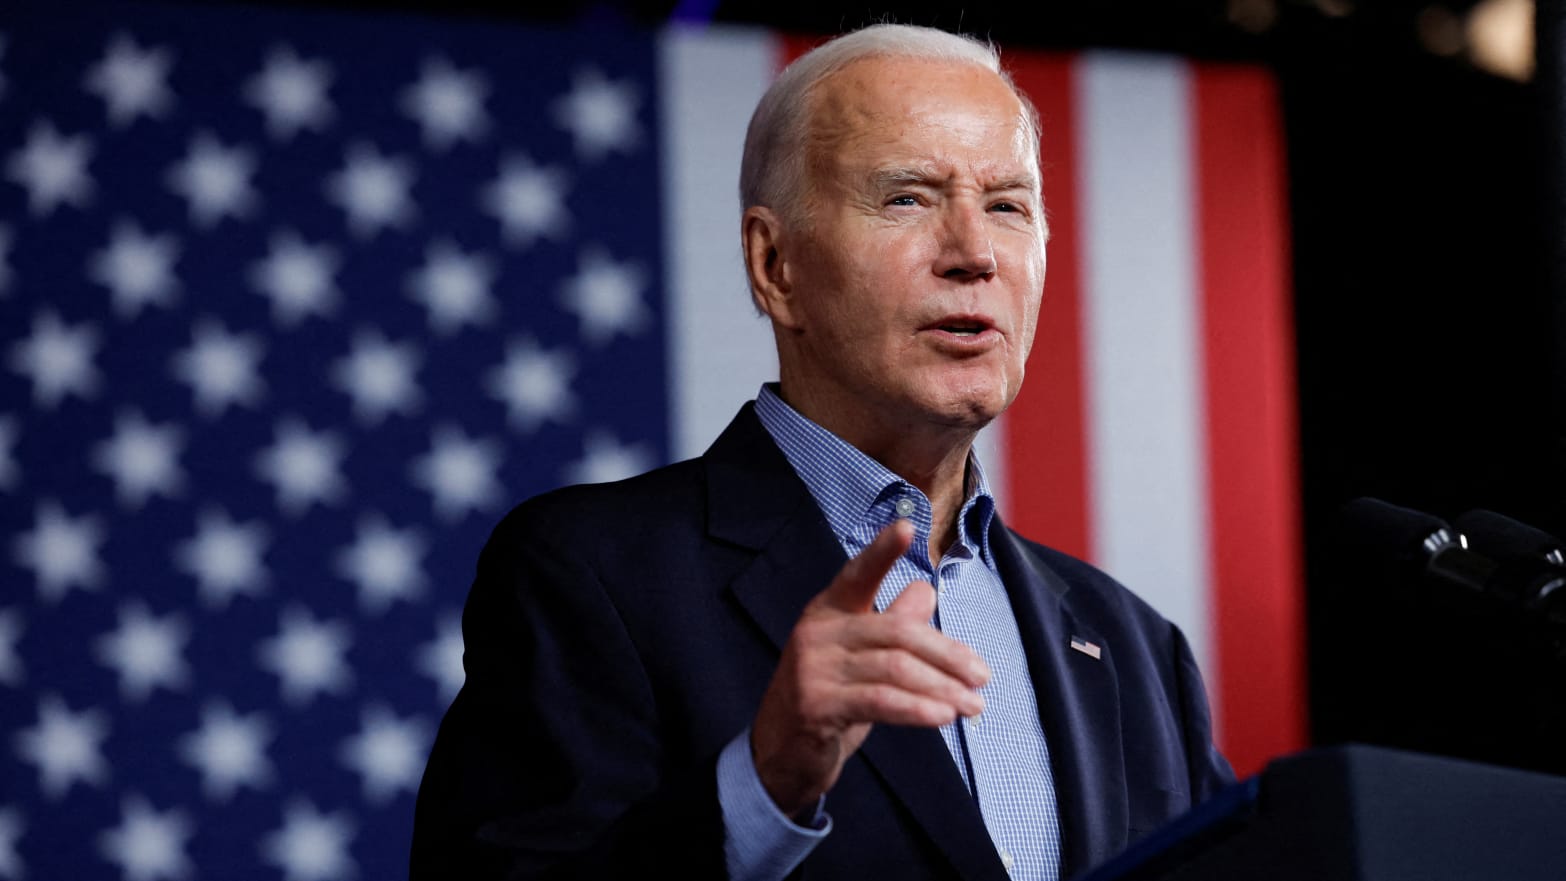 Joe Biden told special counsel Robert Hur he had not intended to keep classified documents after leaving the vice presidency, a transcript of their interviews shows. 